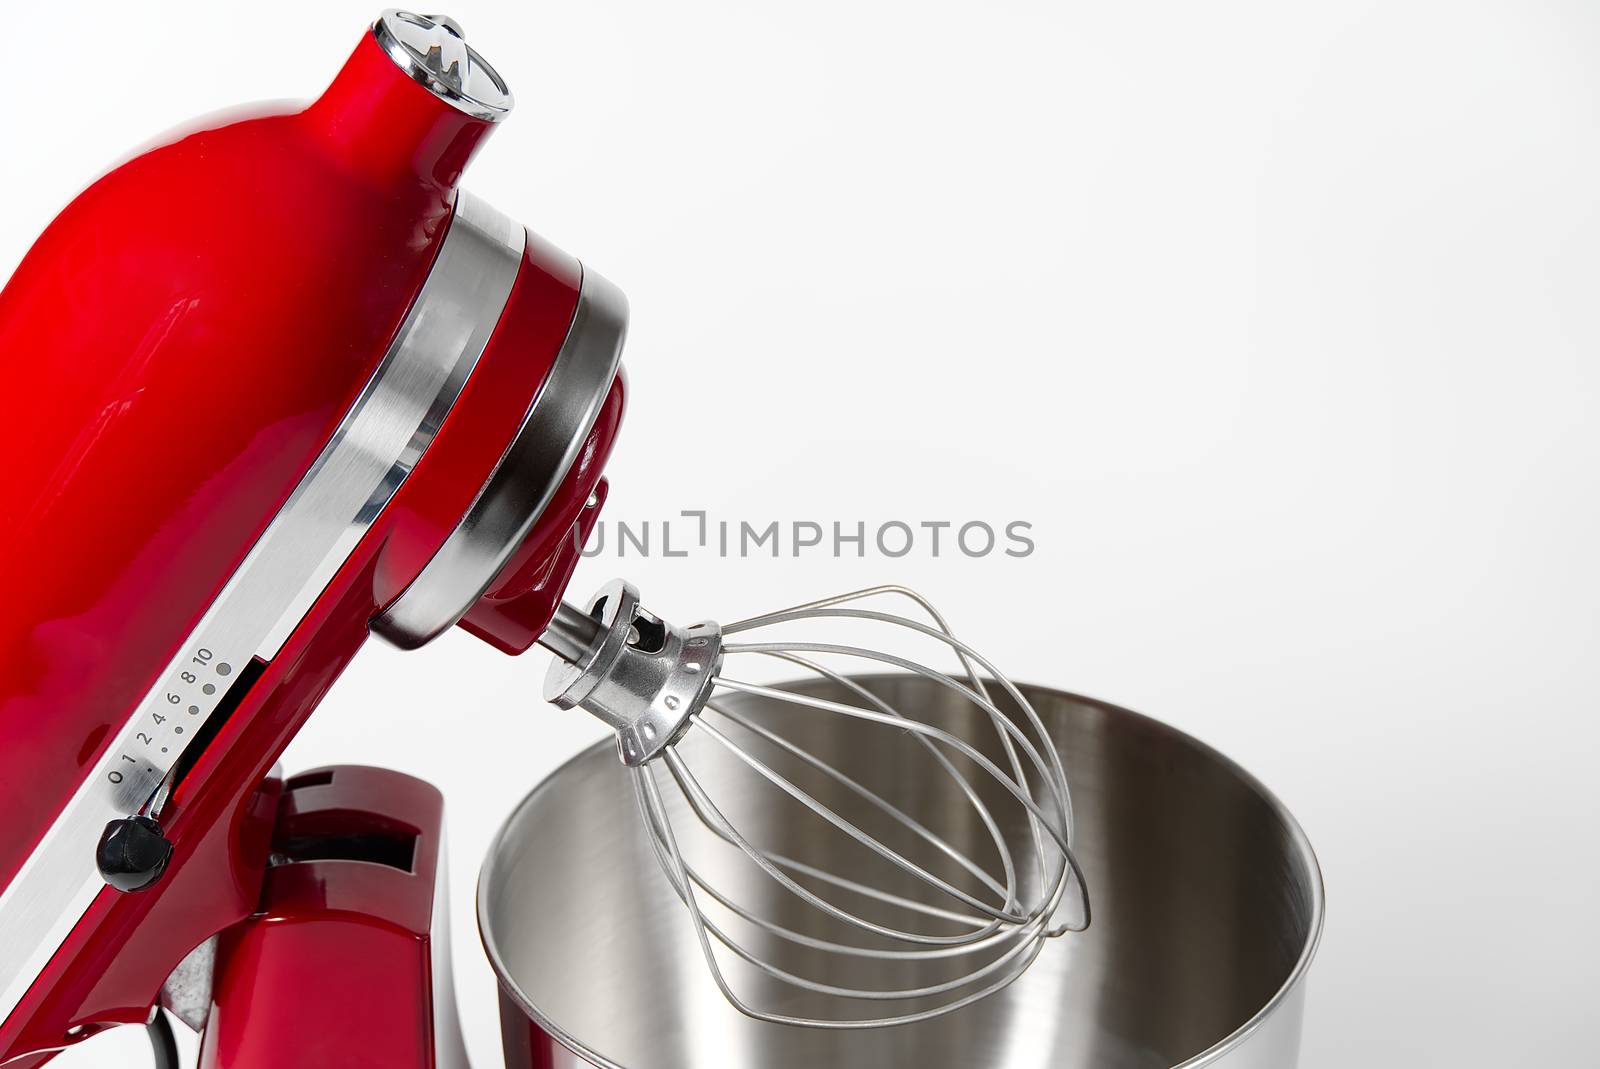 Stylish Red Kitchen Mixer With Clipping Path Isolated On White Background. Professional steel electric mixer with Metal Whisk by PhotoTime